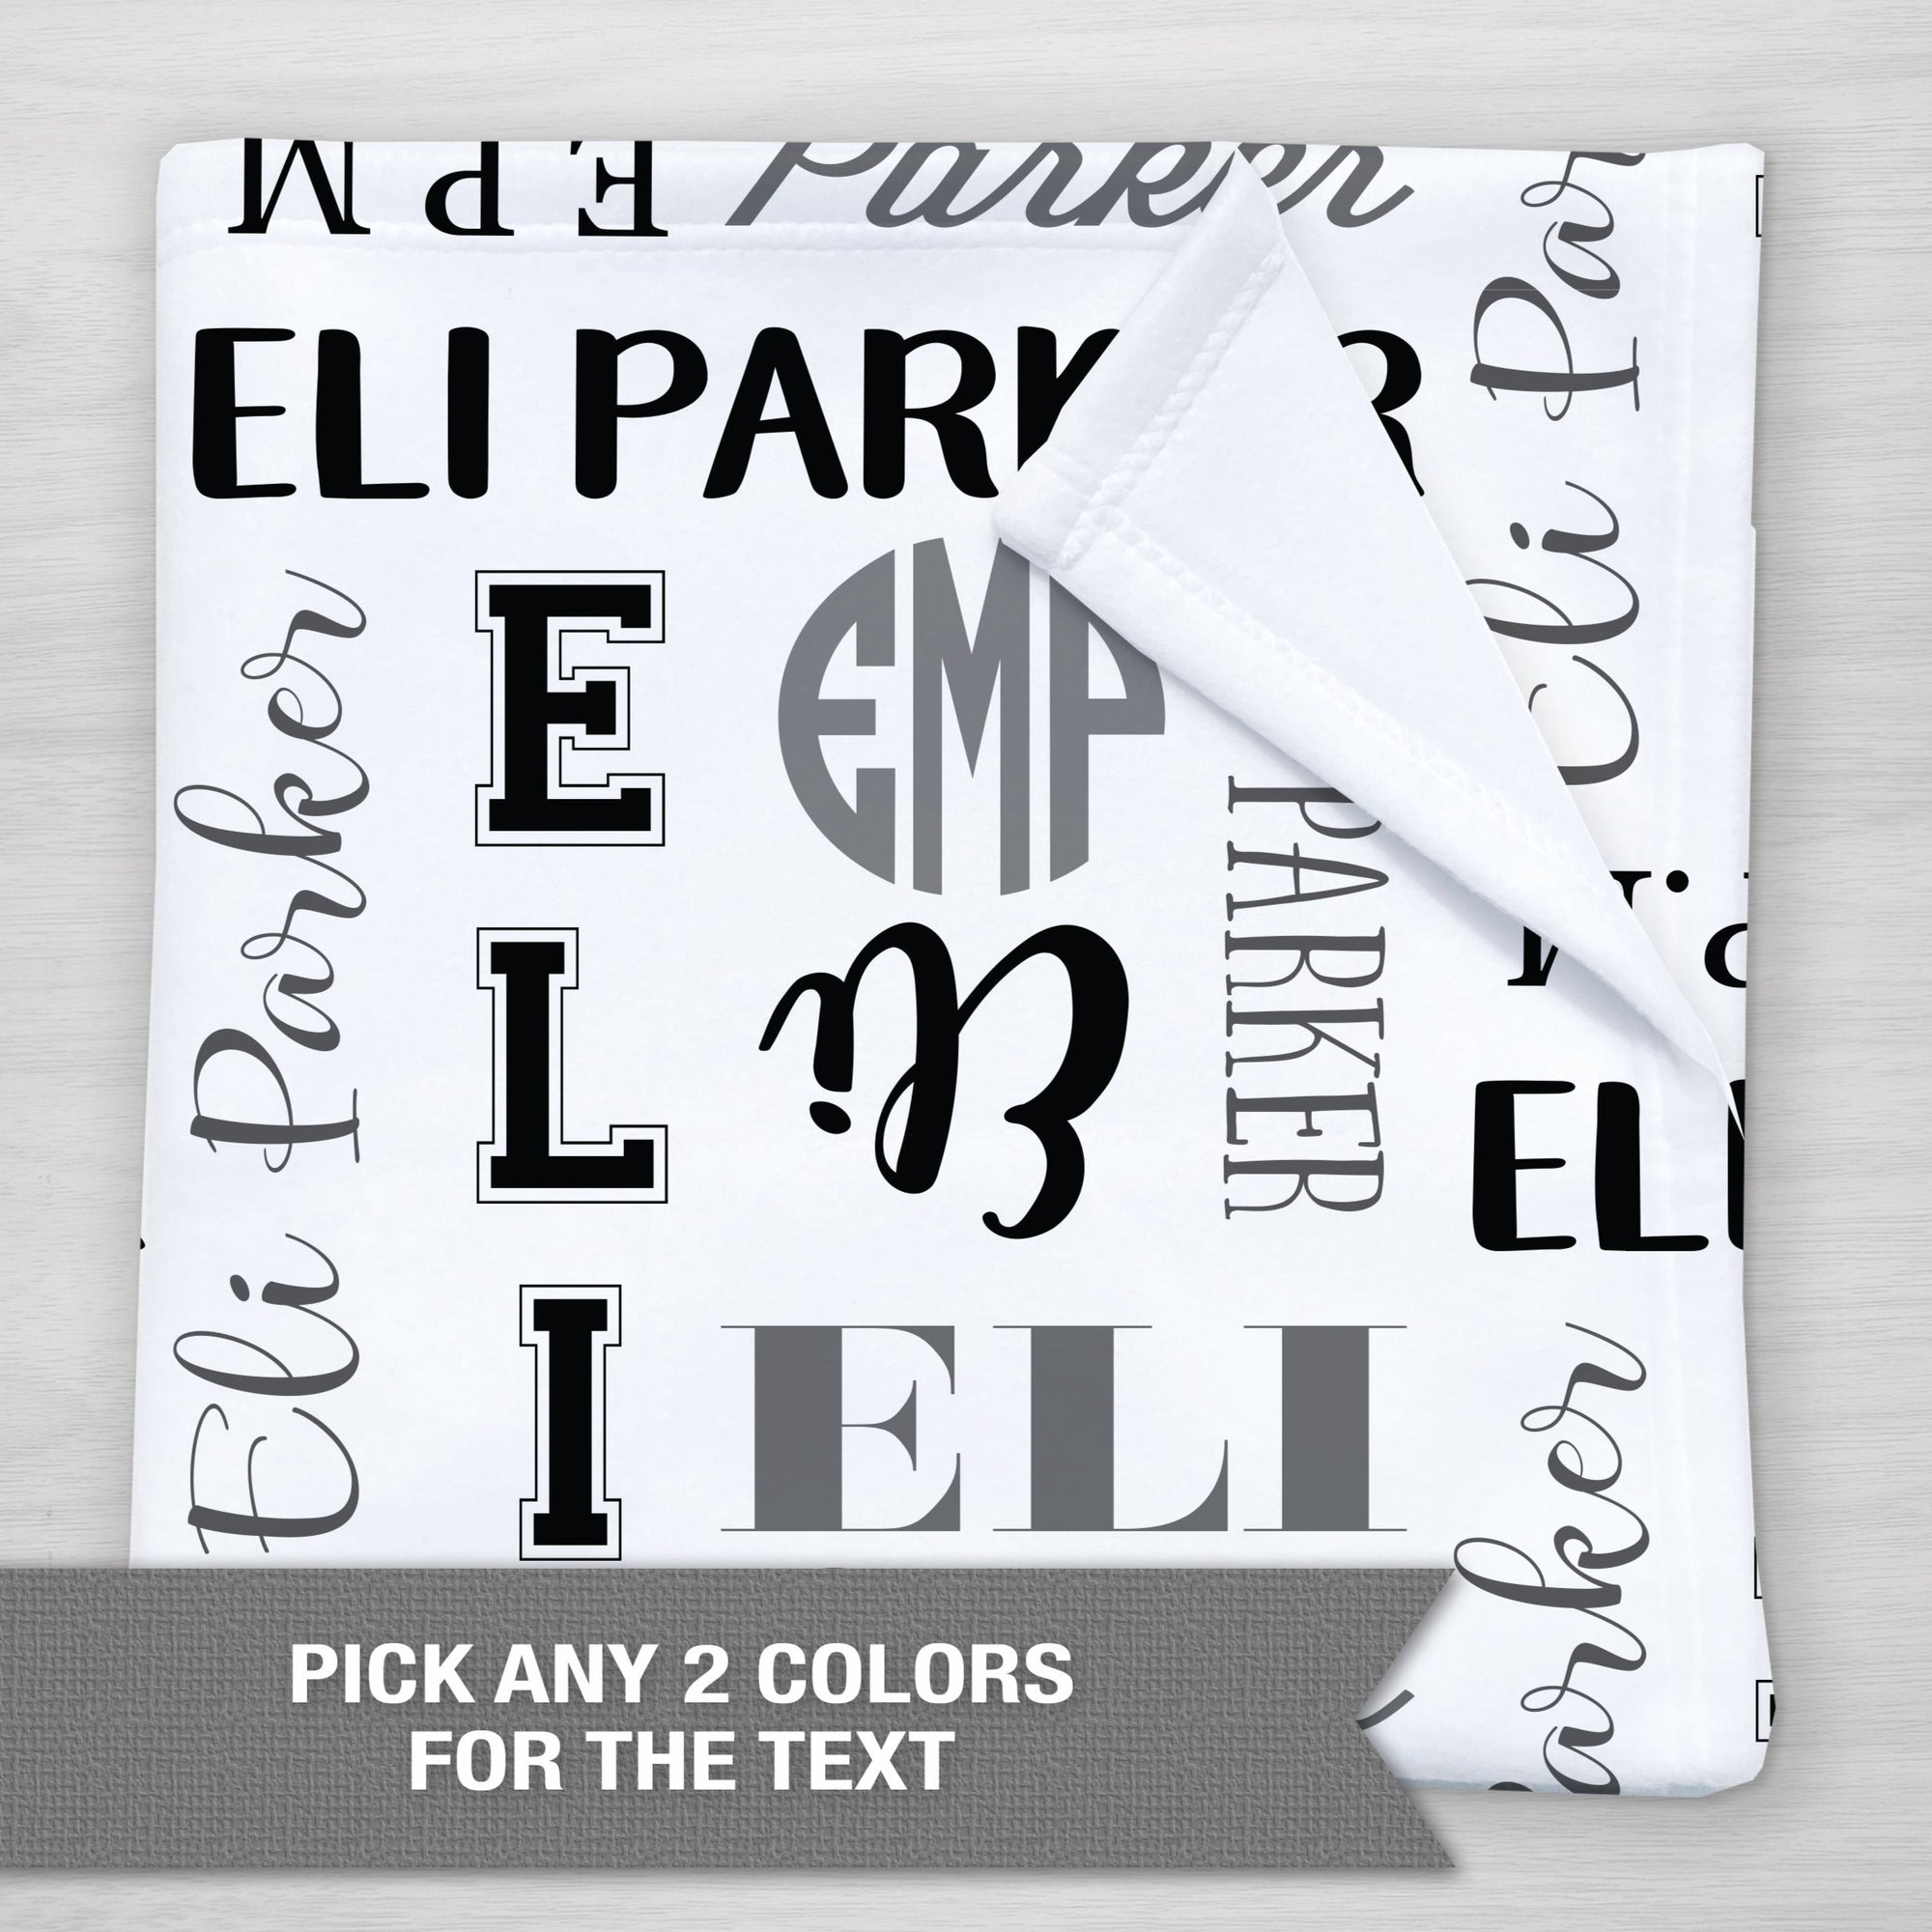 Black and Gray Personalized and Monogrammed blanket, super soft fleece, choose any color scheme